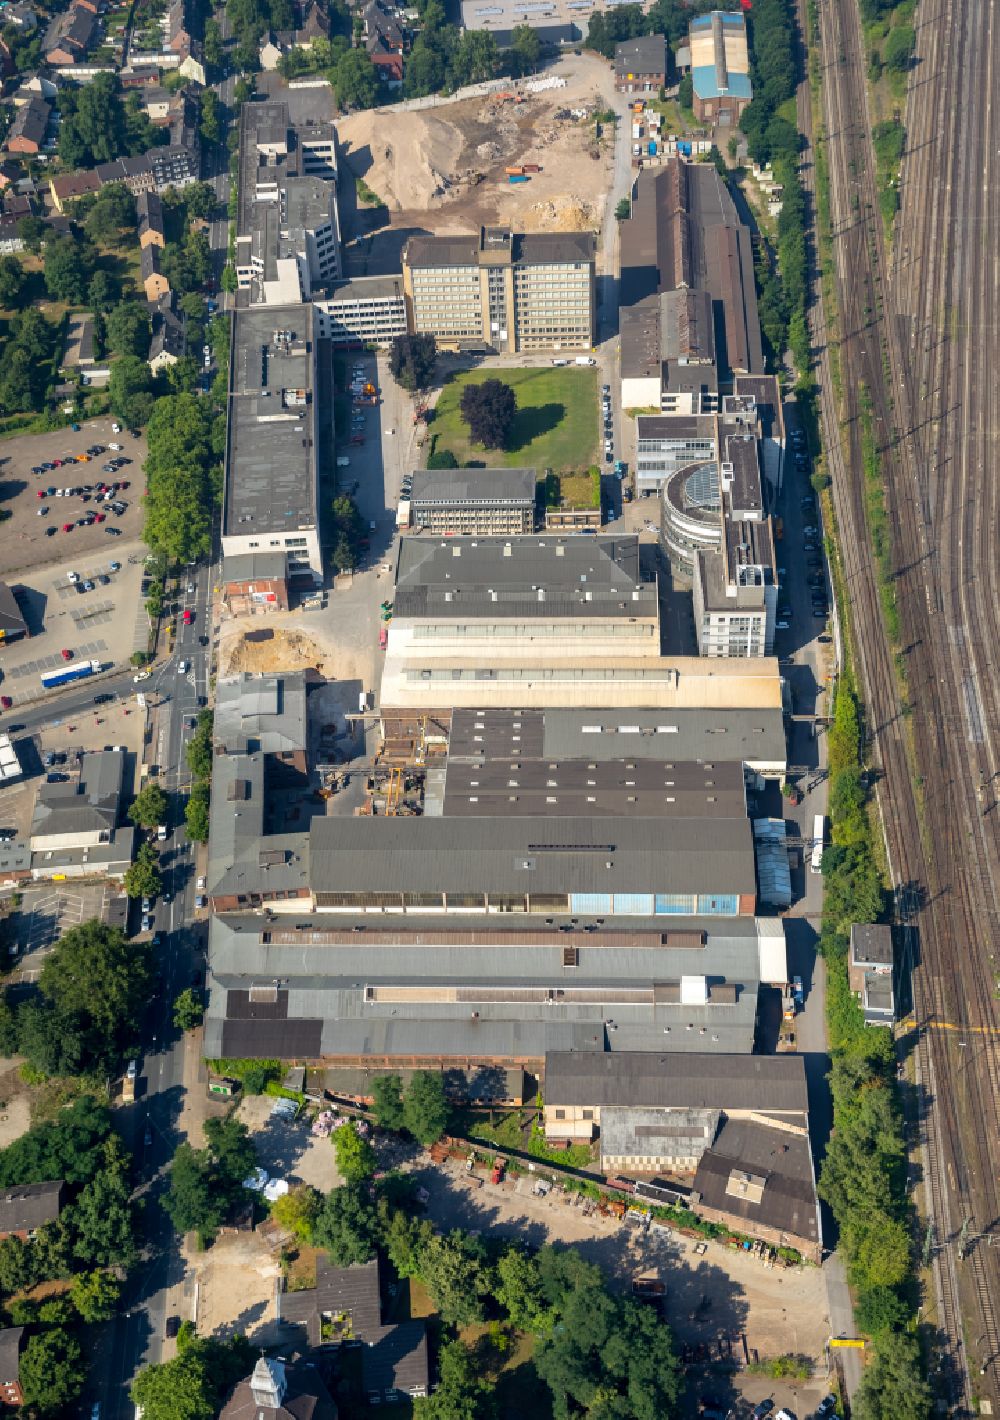 Aerial photograph Oberhausen - Premises of BABCOCK manufacturing center GmbH with warehouses, corporate buildings and production facilities in Oberhausen in North Rhine-Westphalia